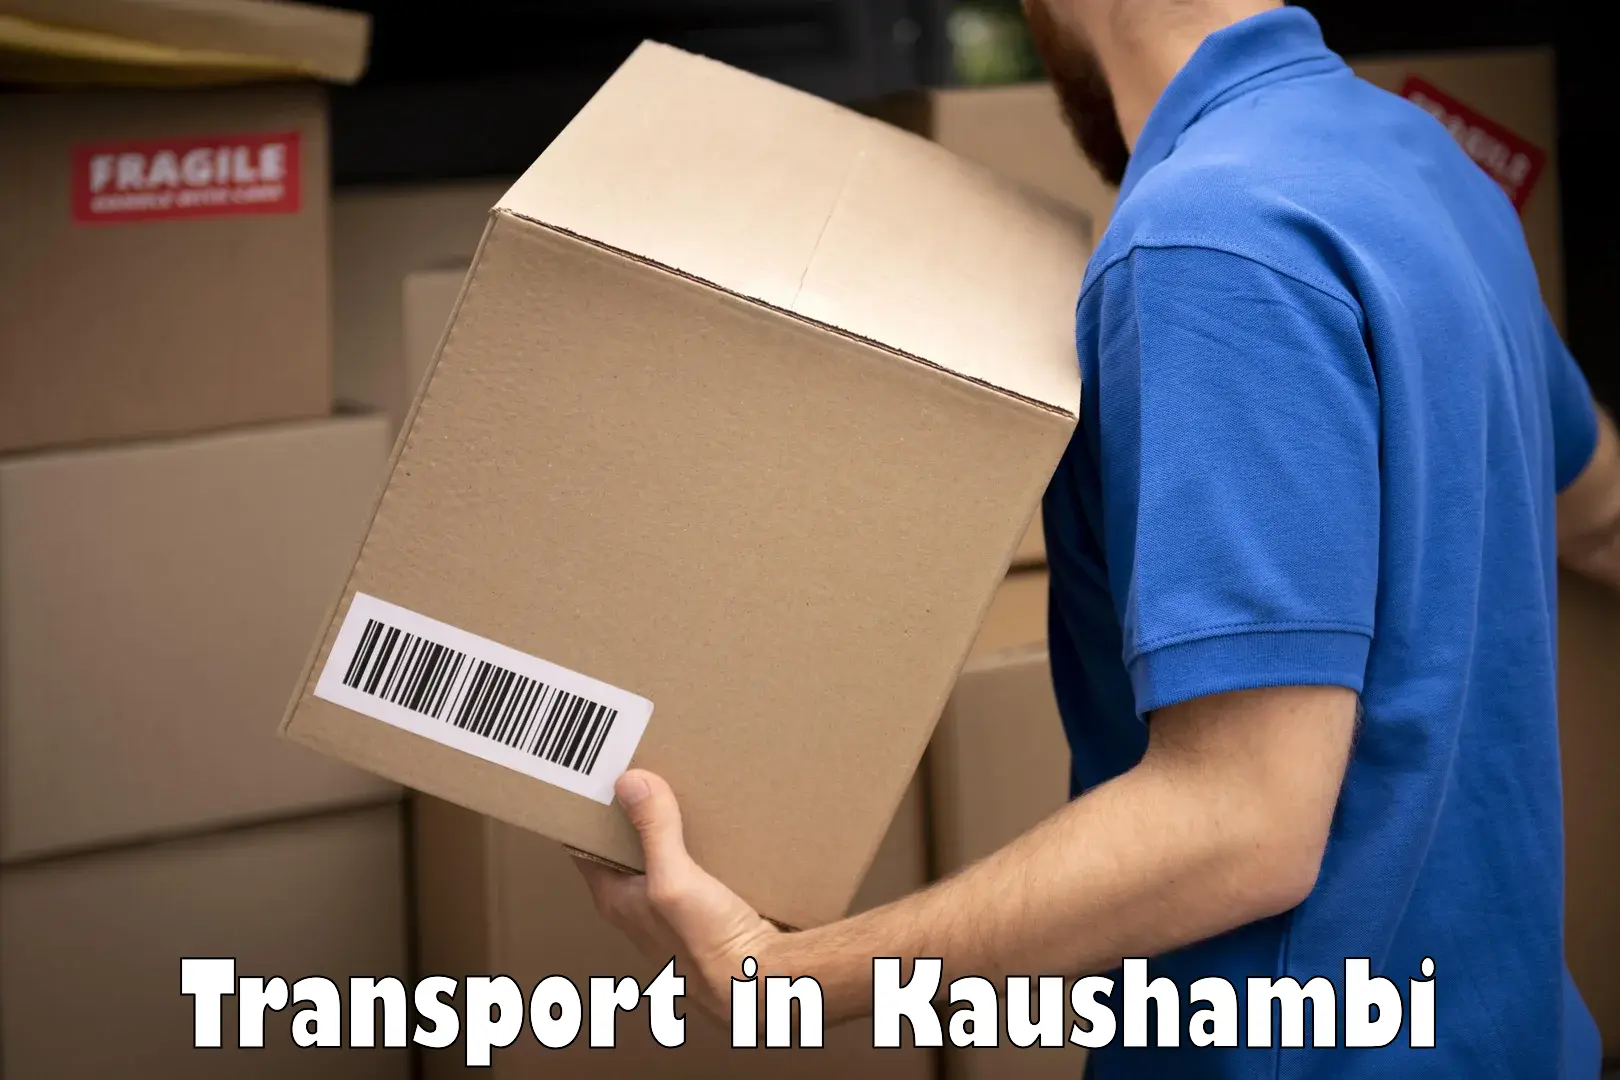 Air freight transport services in Kaushambi